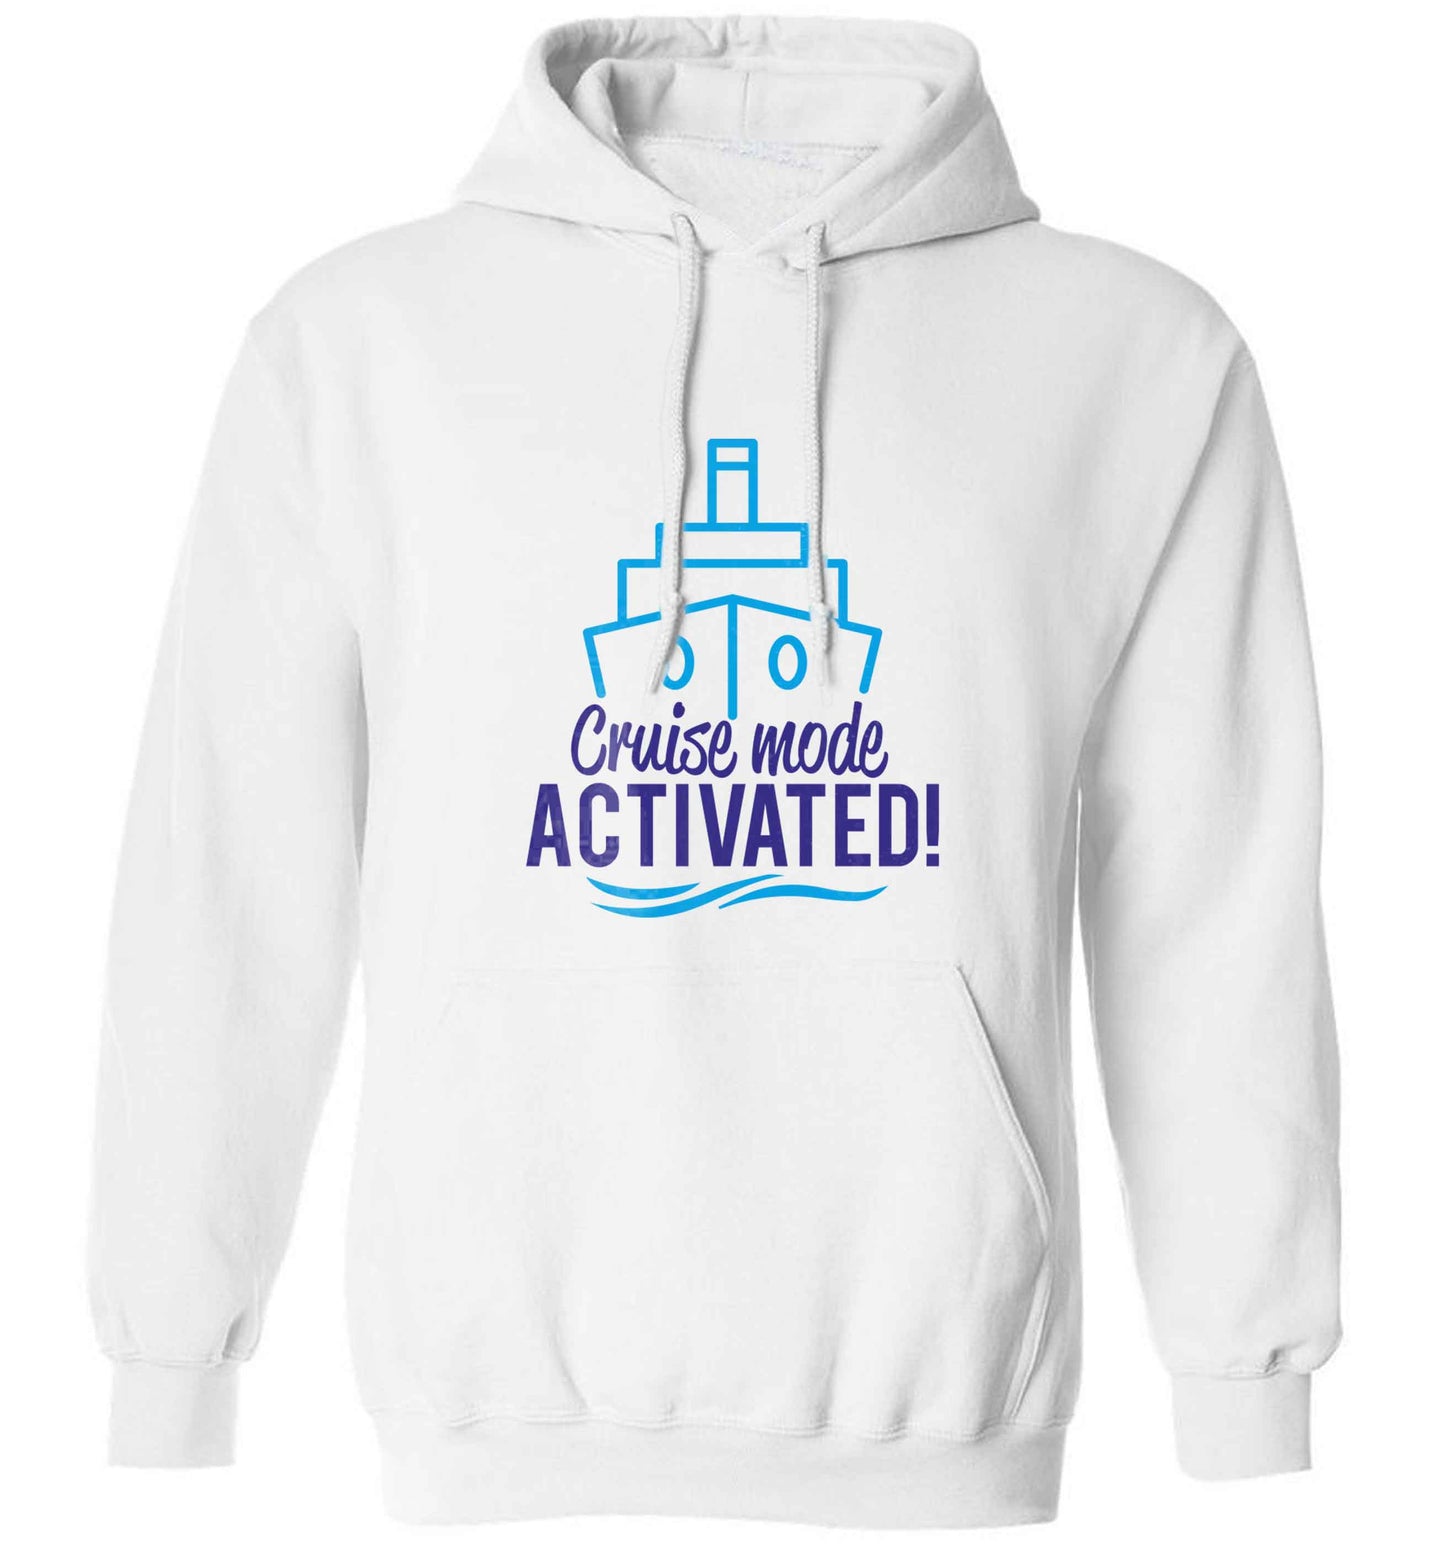 Cruise mode activated adults unisex white hoodie 2XL